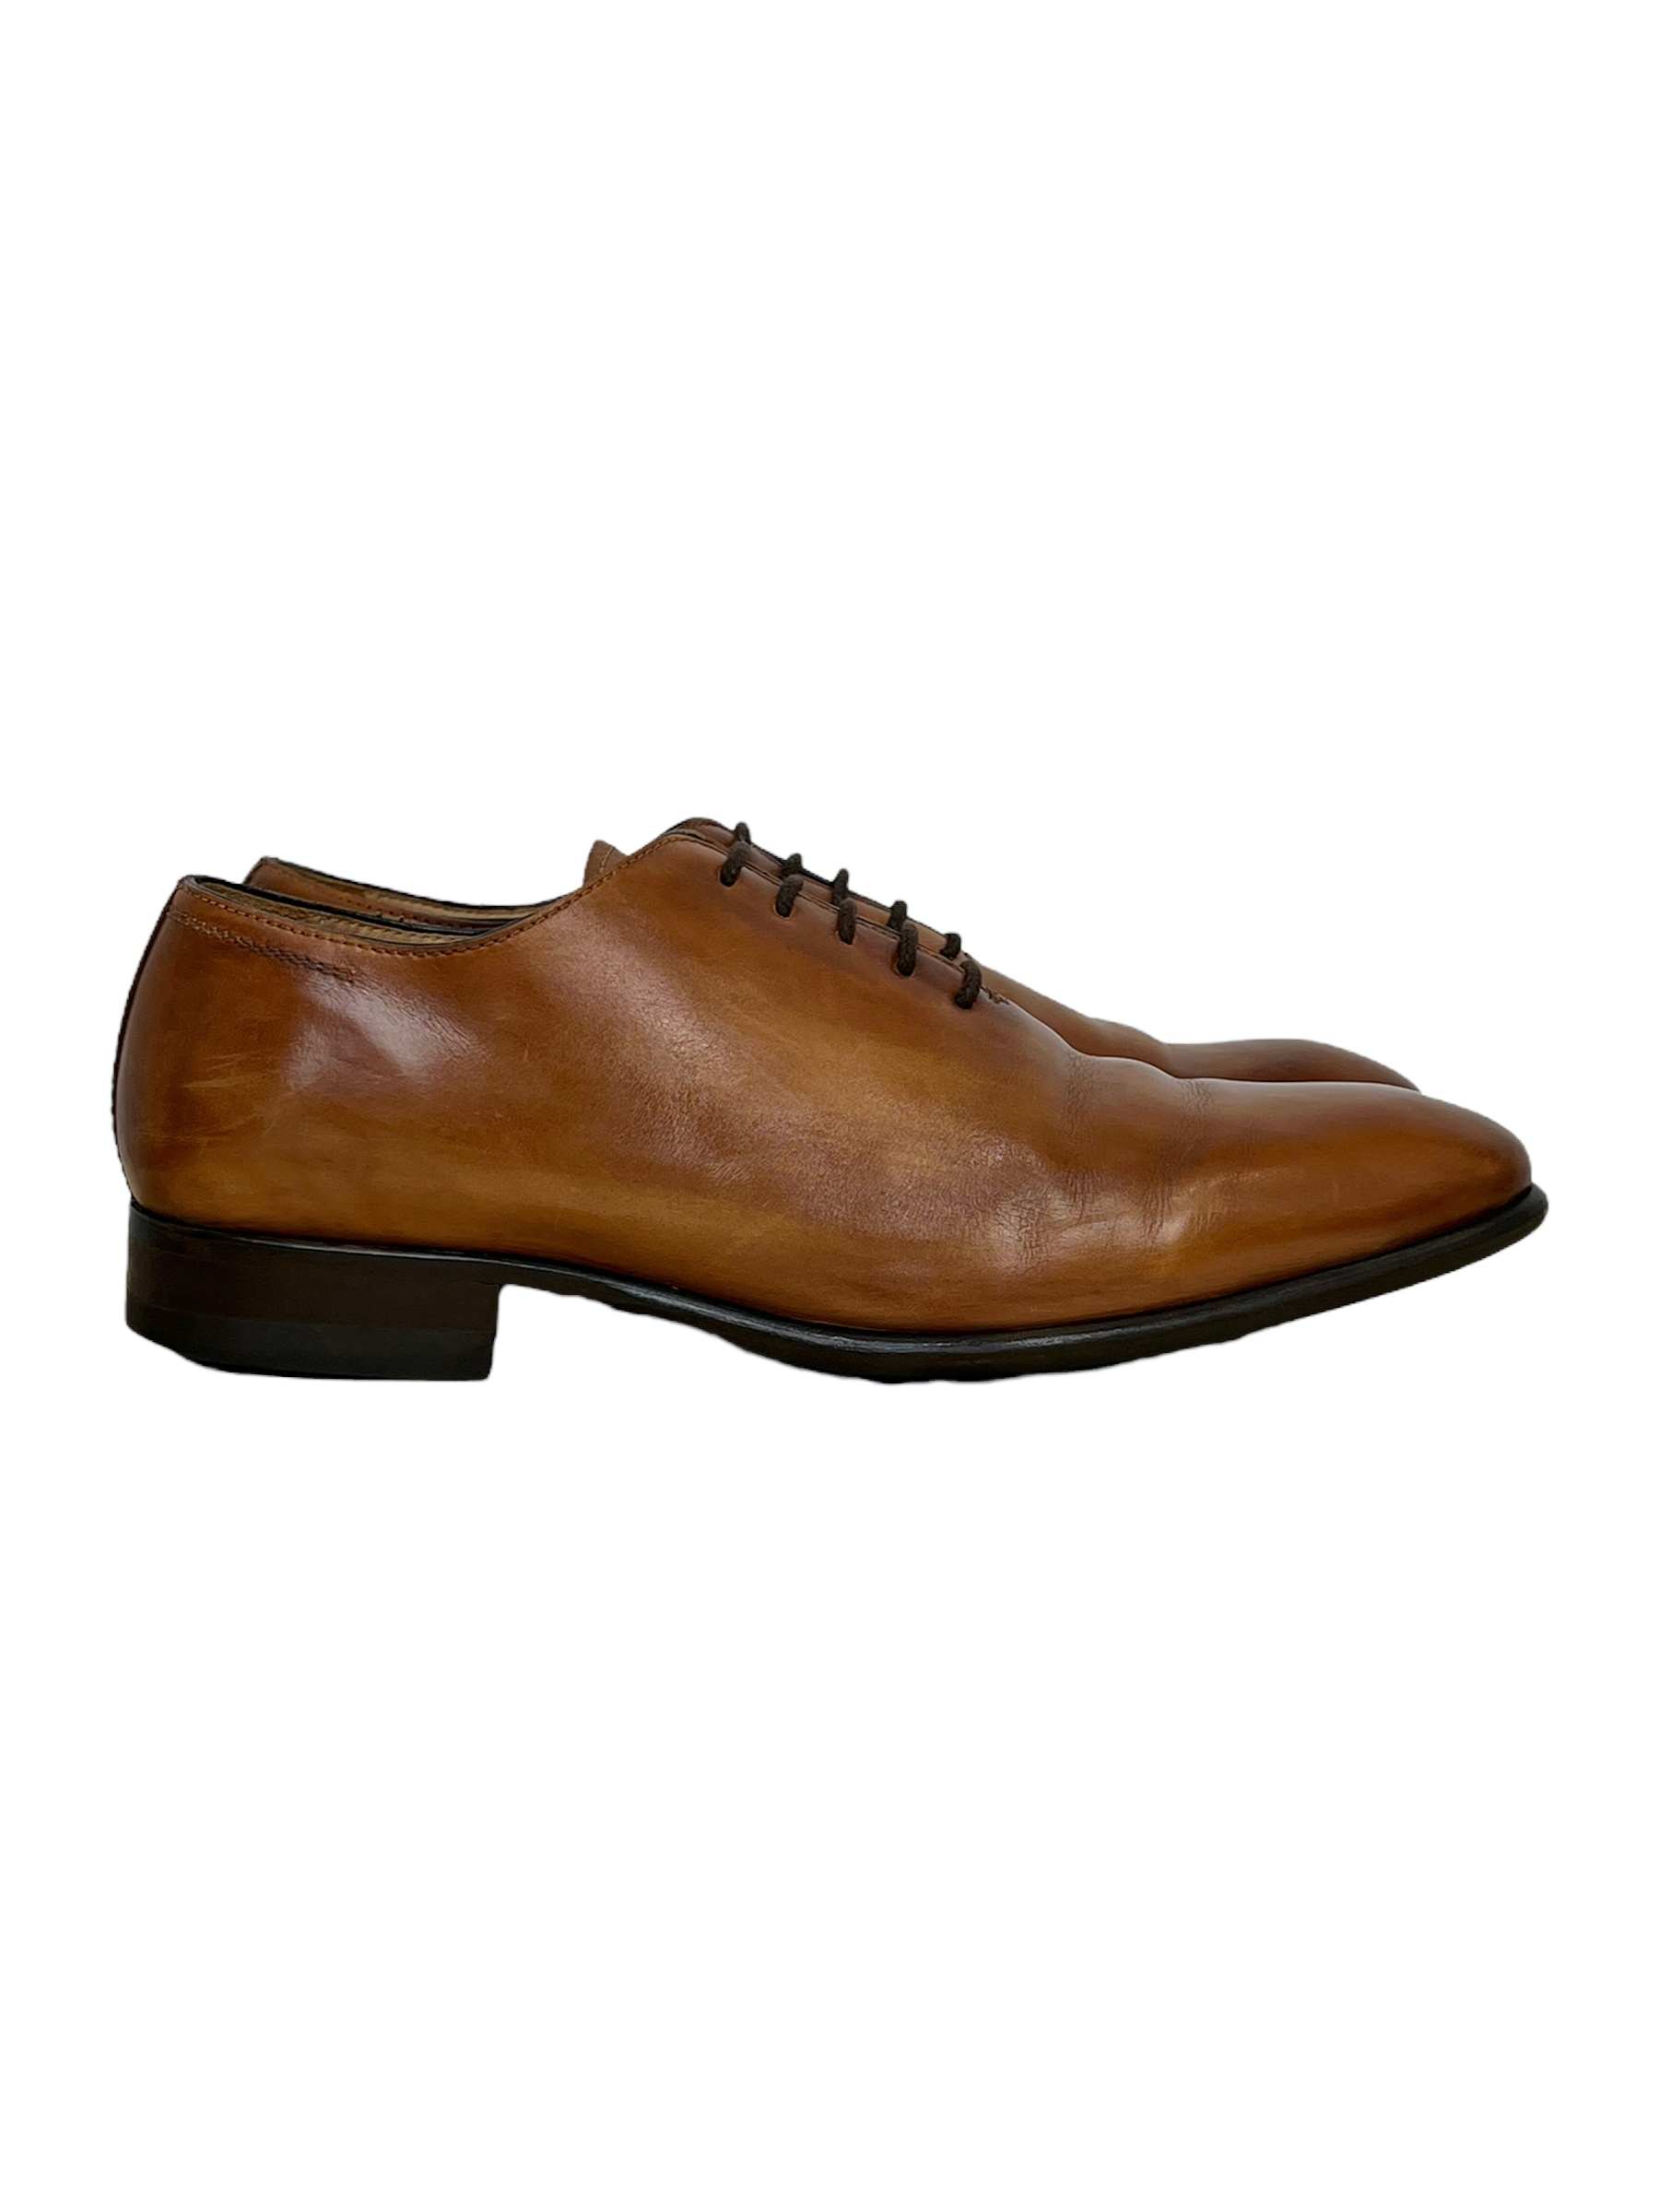 Harry Rosen Brown Whole Cut Oxford Dress Shoe - Genuine Design Luxury Consignment for Men. New & Pre-Owned Clothing, Shoes, & Accessories. Calgary, Canada